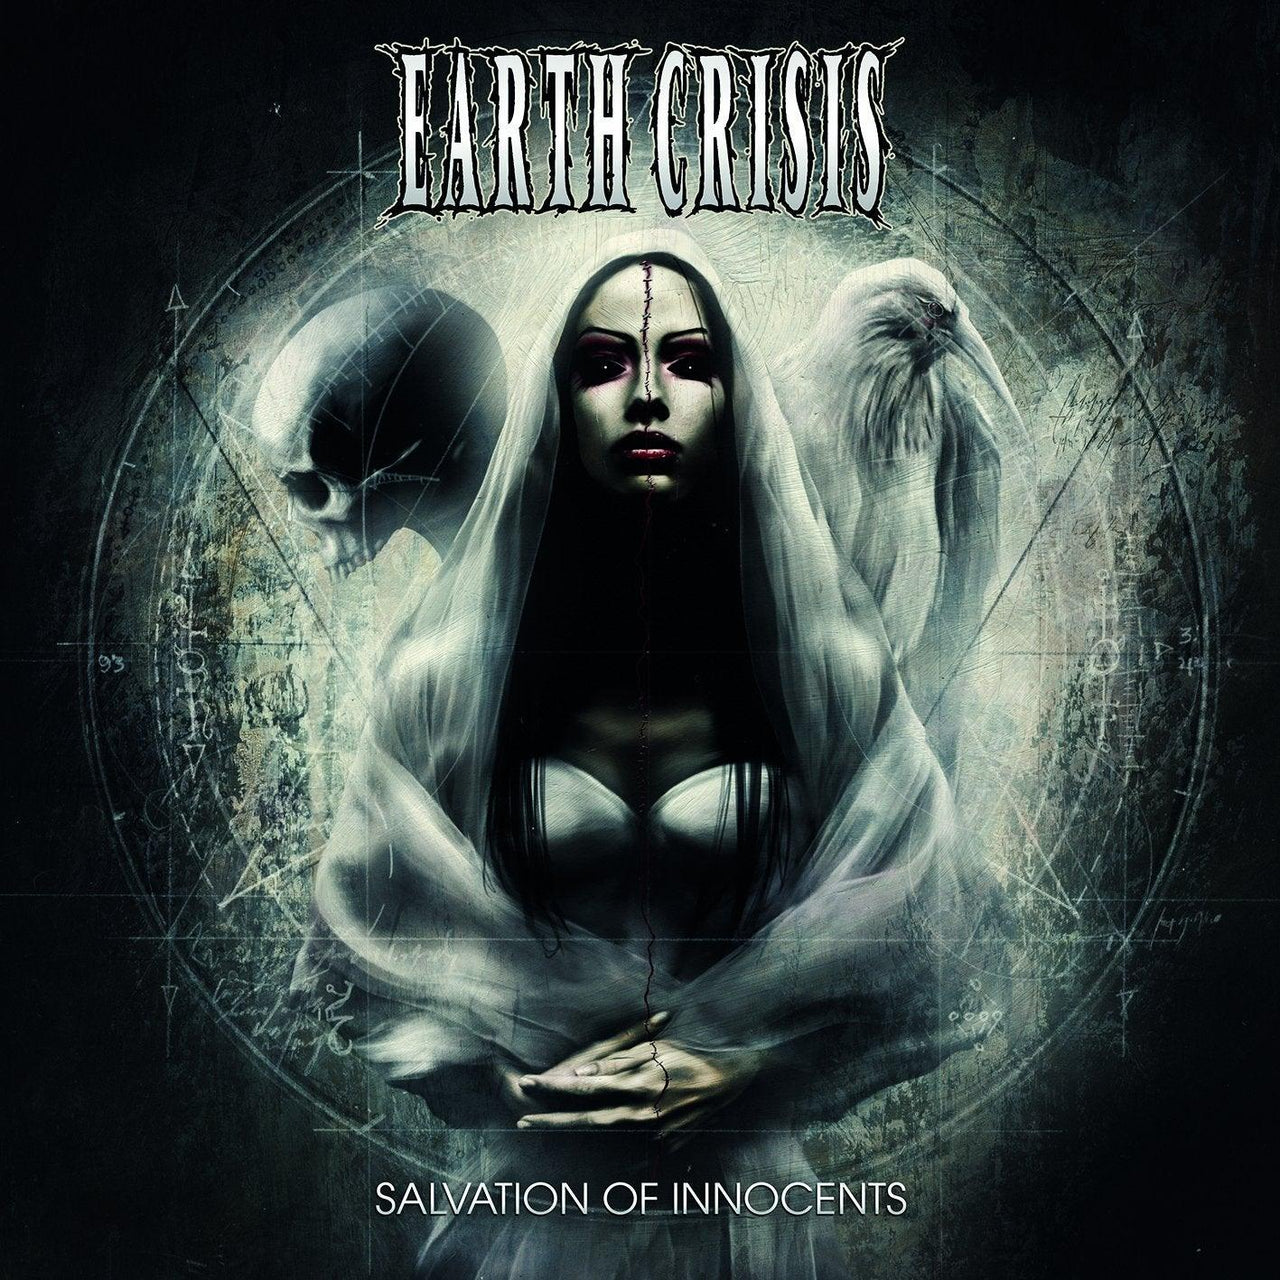 Buy – Earth Crisis "Salvation of Innocents" CD – Band & Music Merch – Cold Cuts Merch